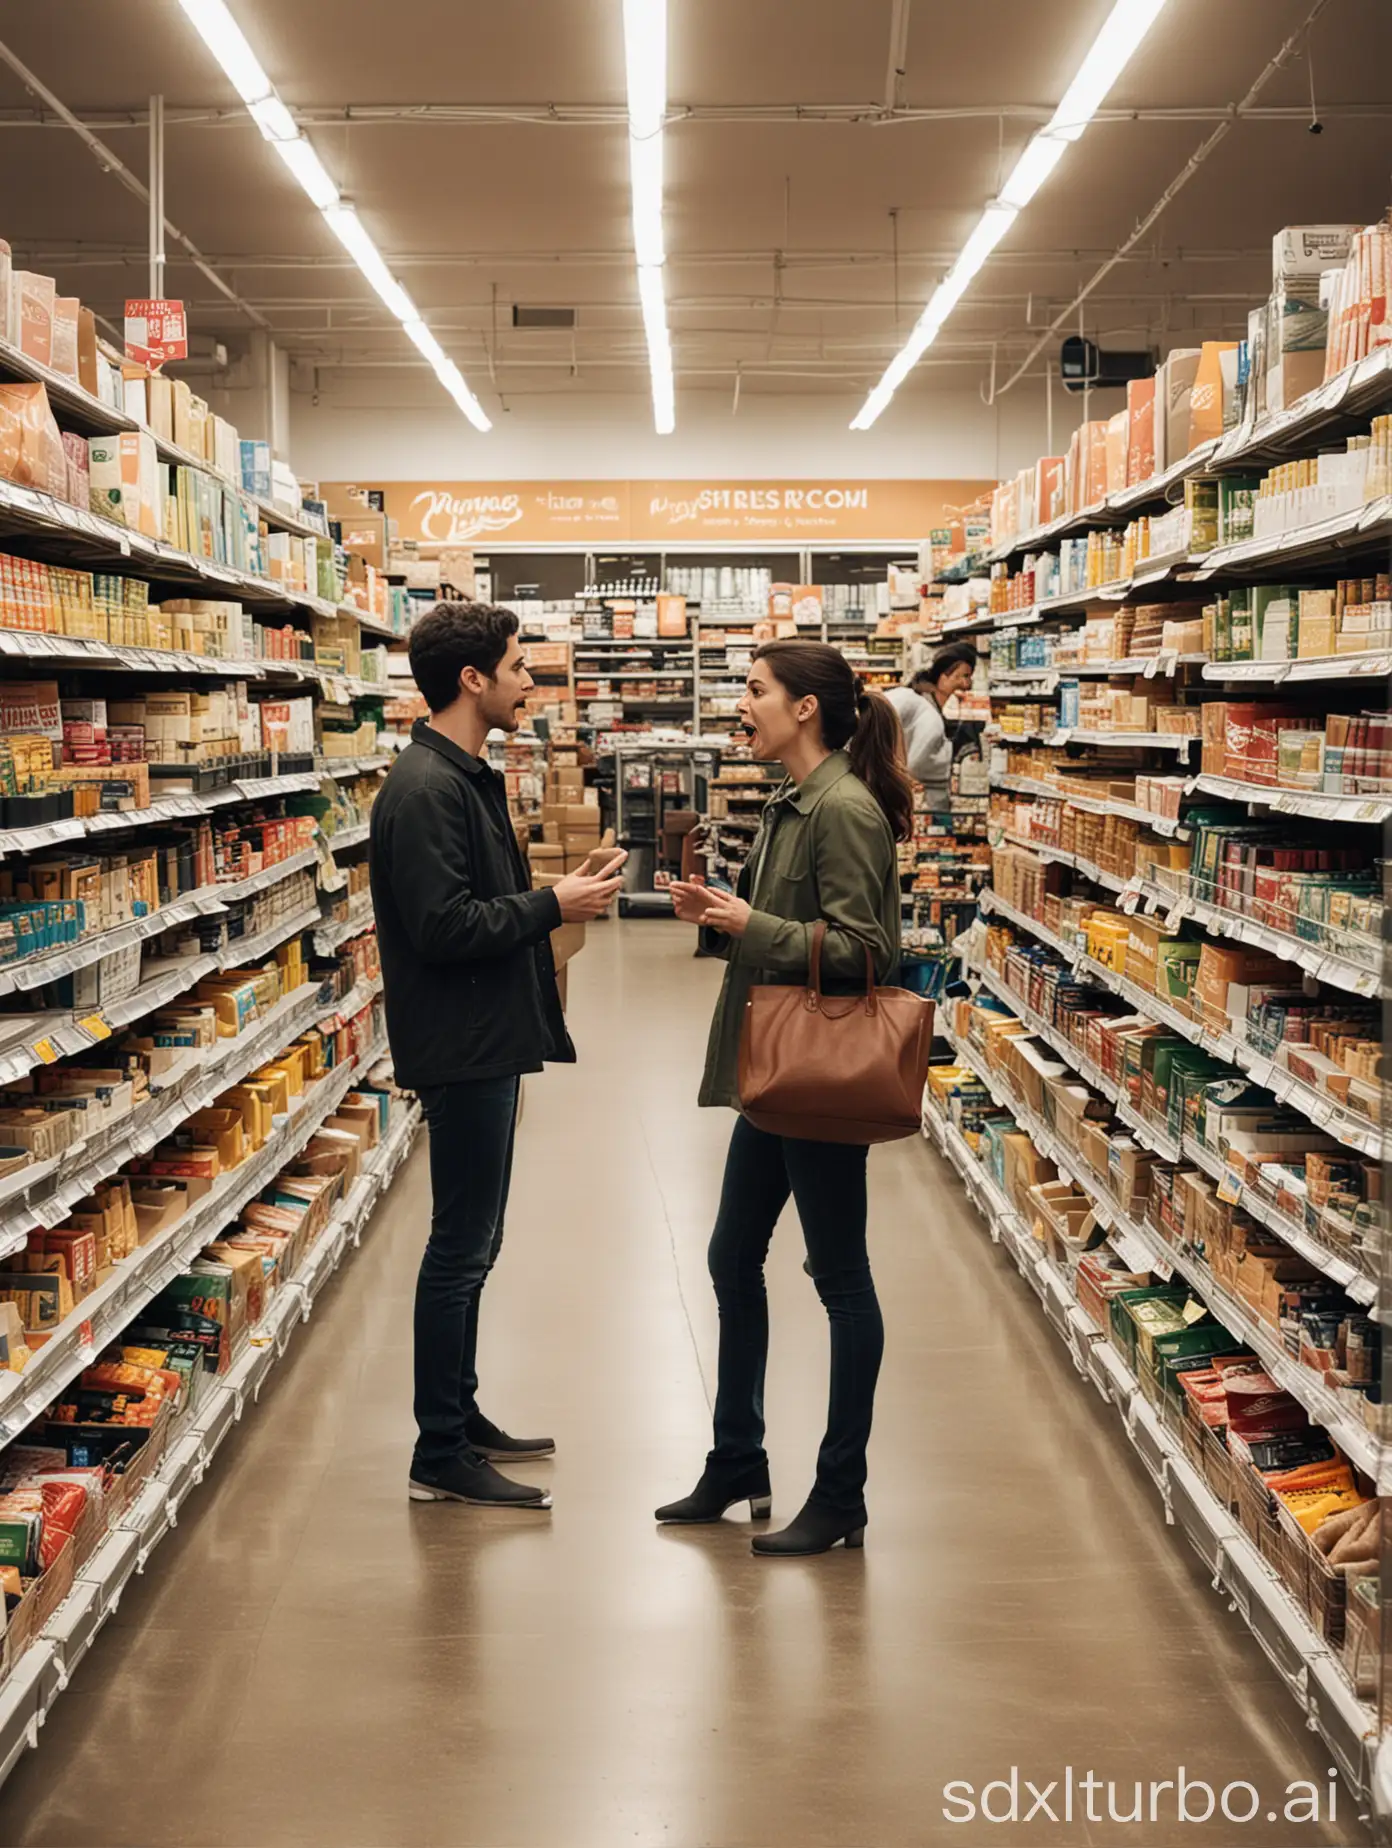 A picture of a busy grocery store with two people arguing in the middle